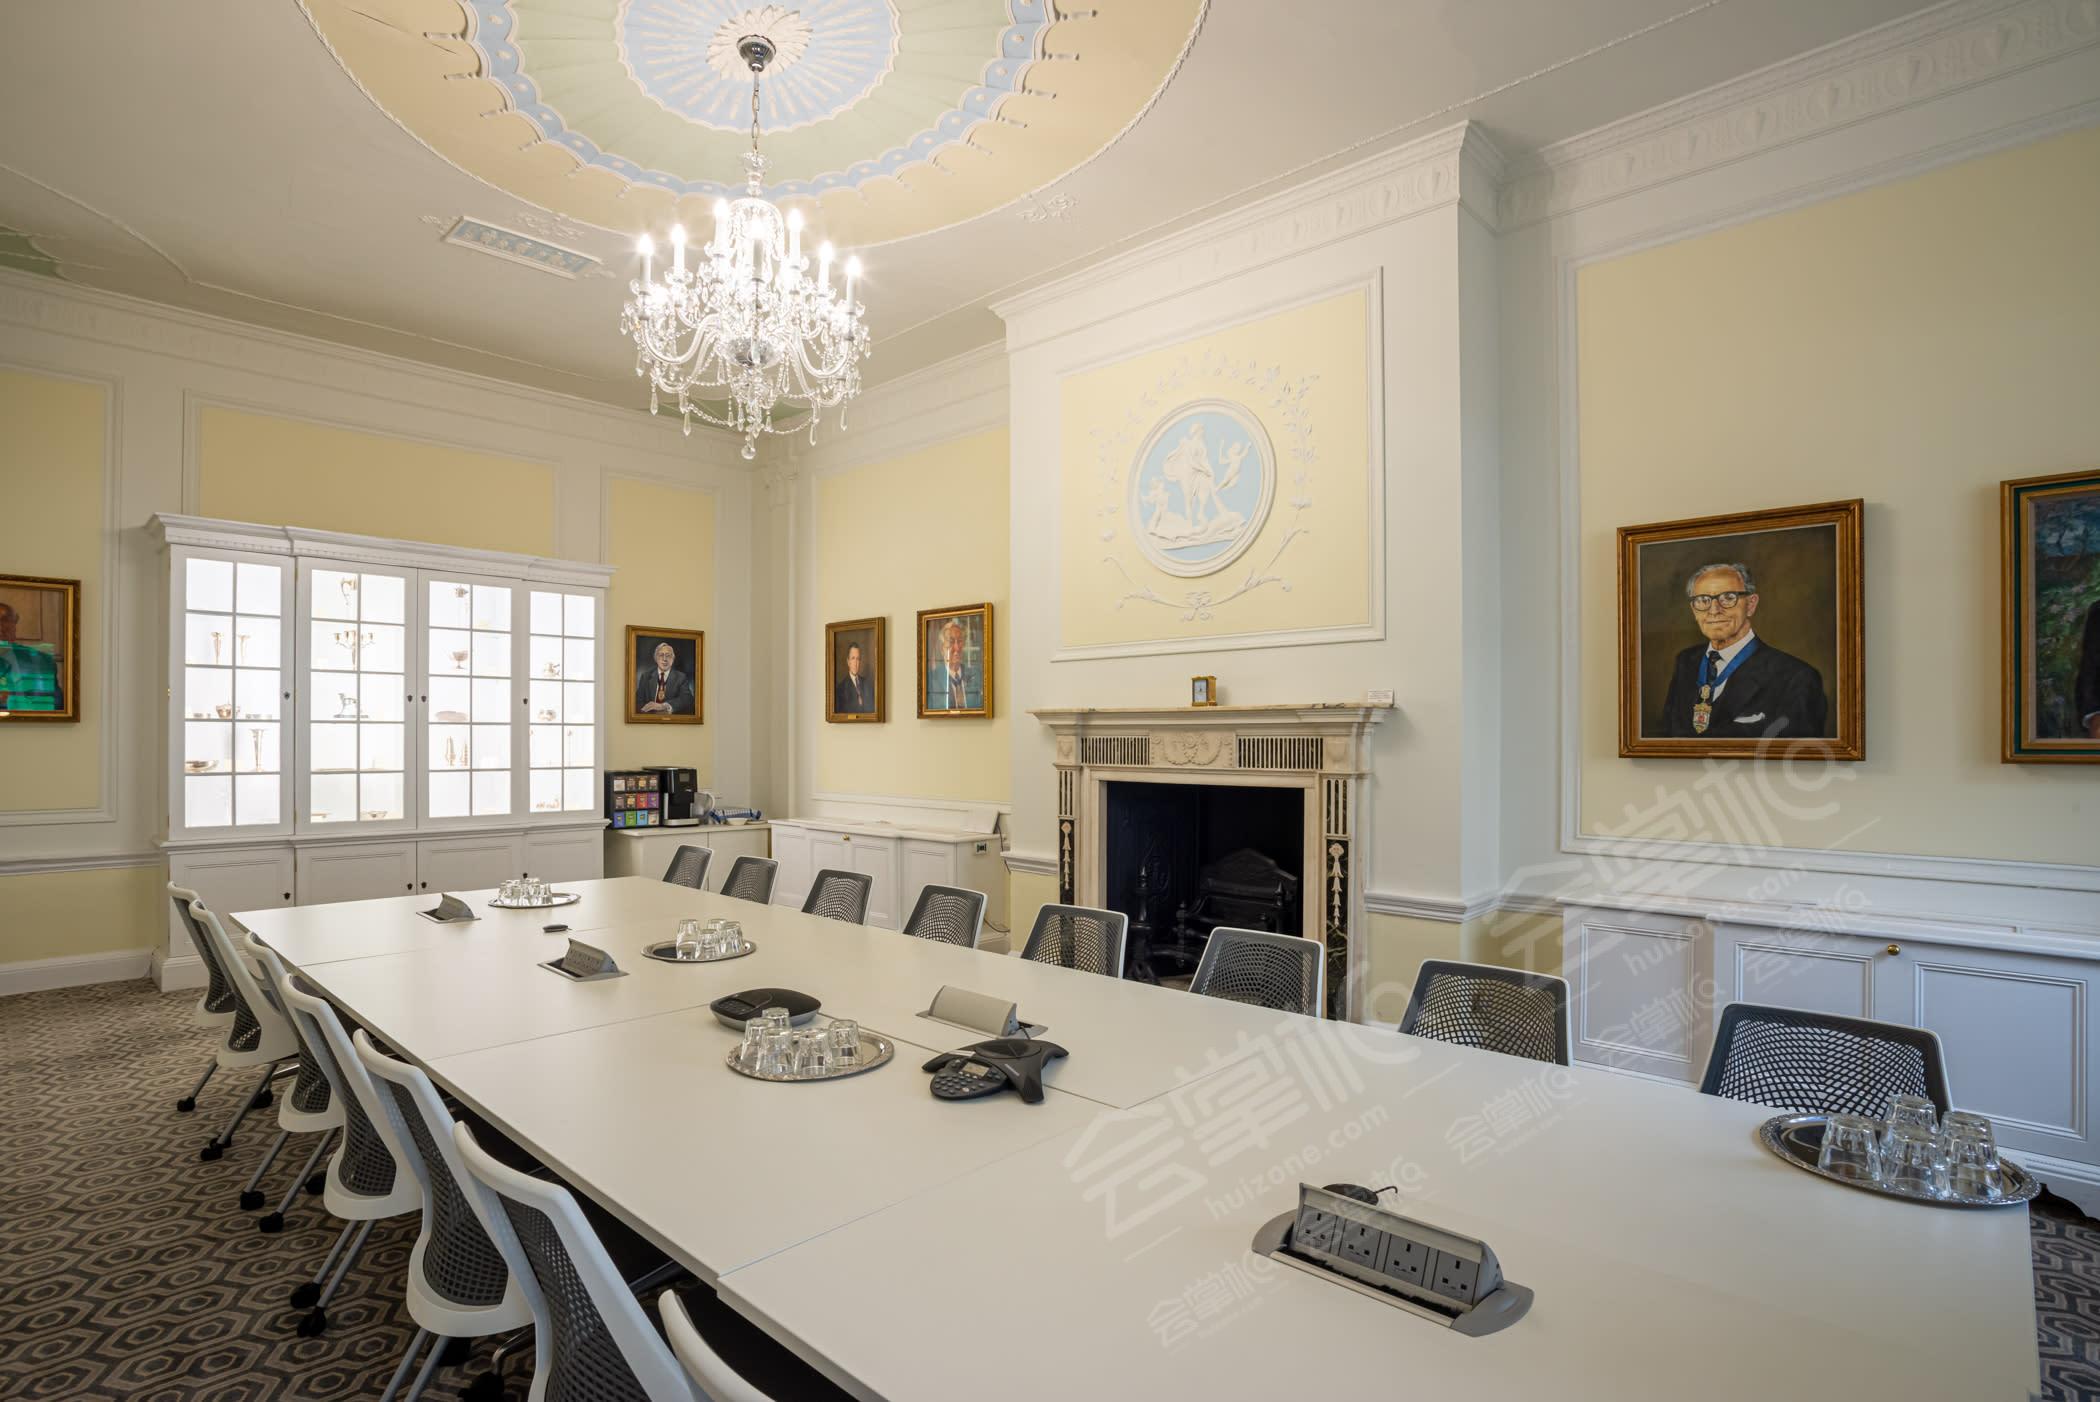 Flexible Period Rooms with Original Features